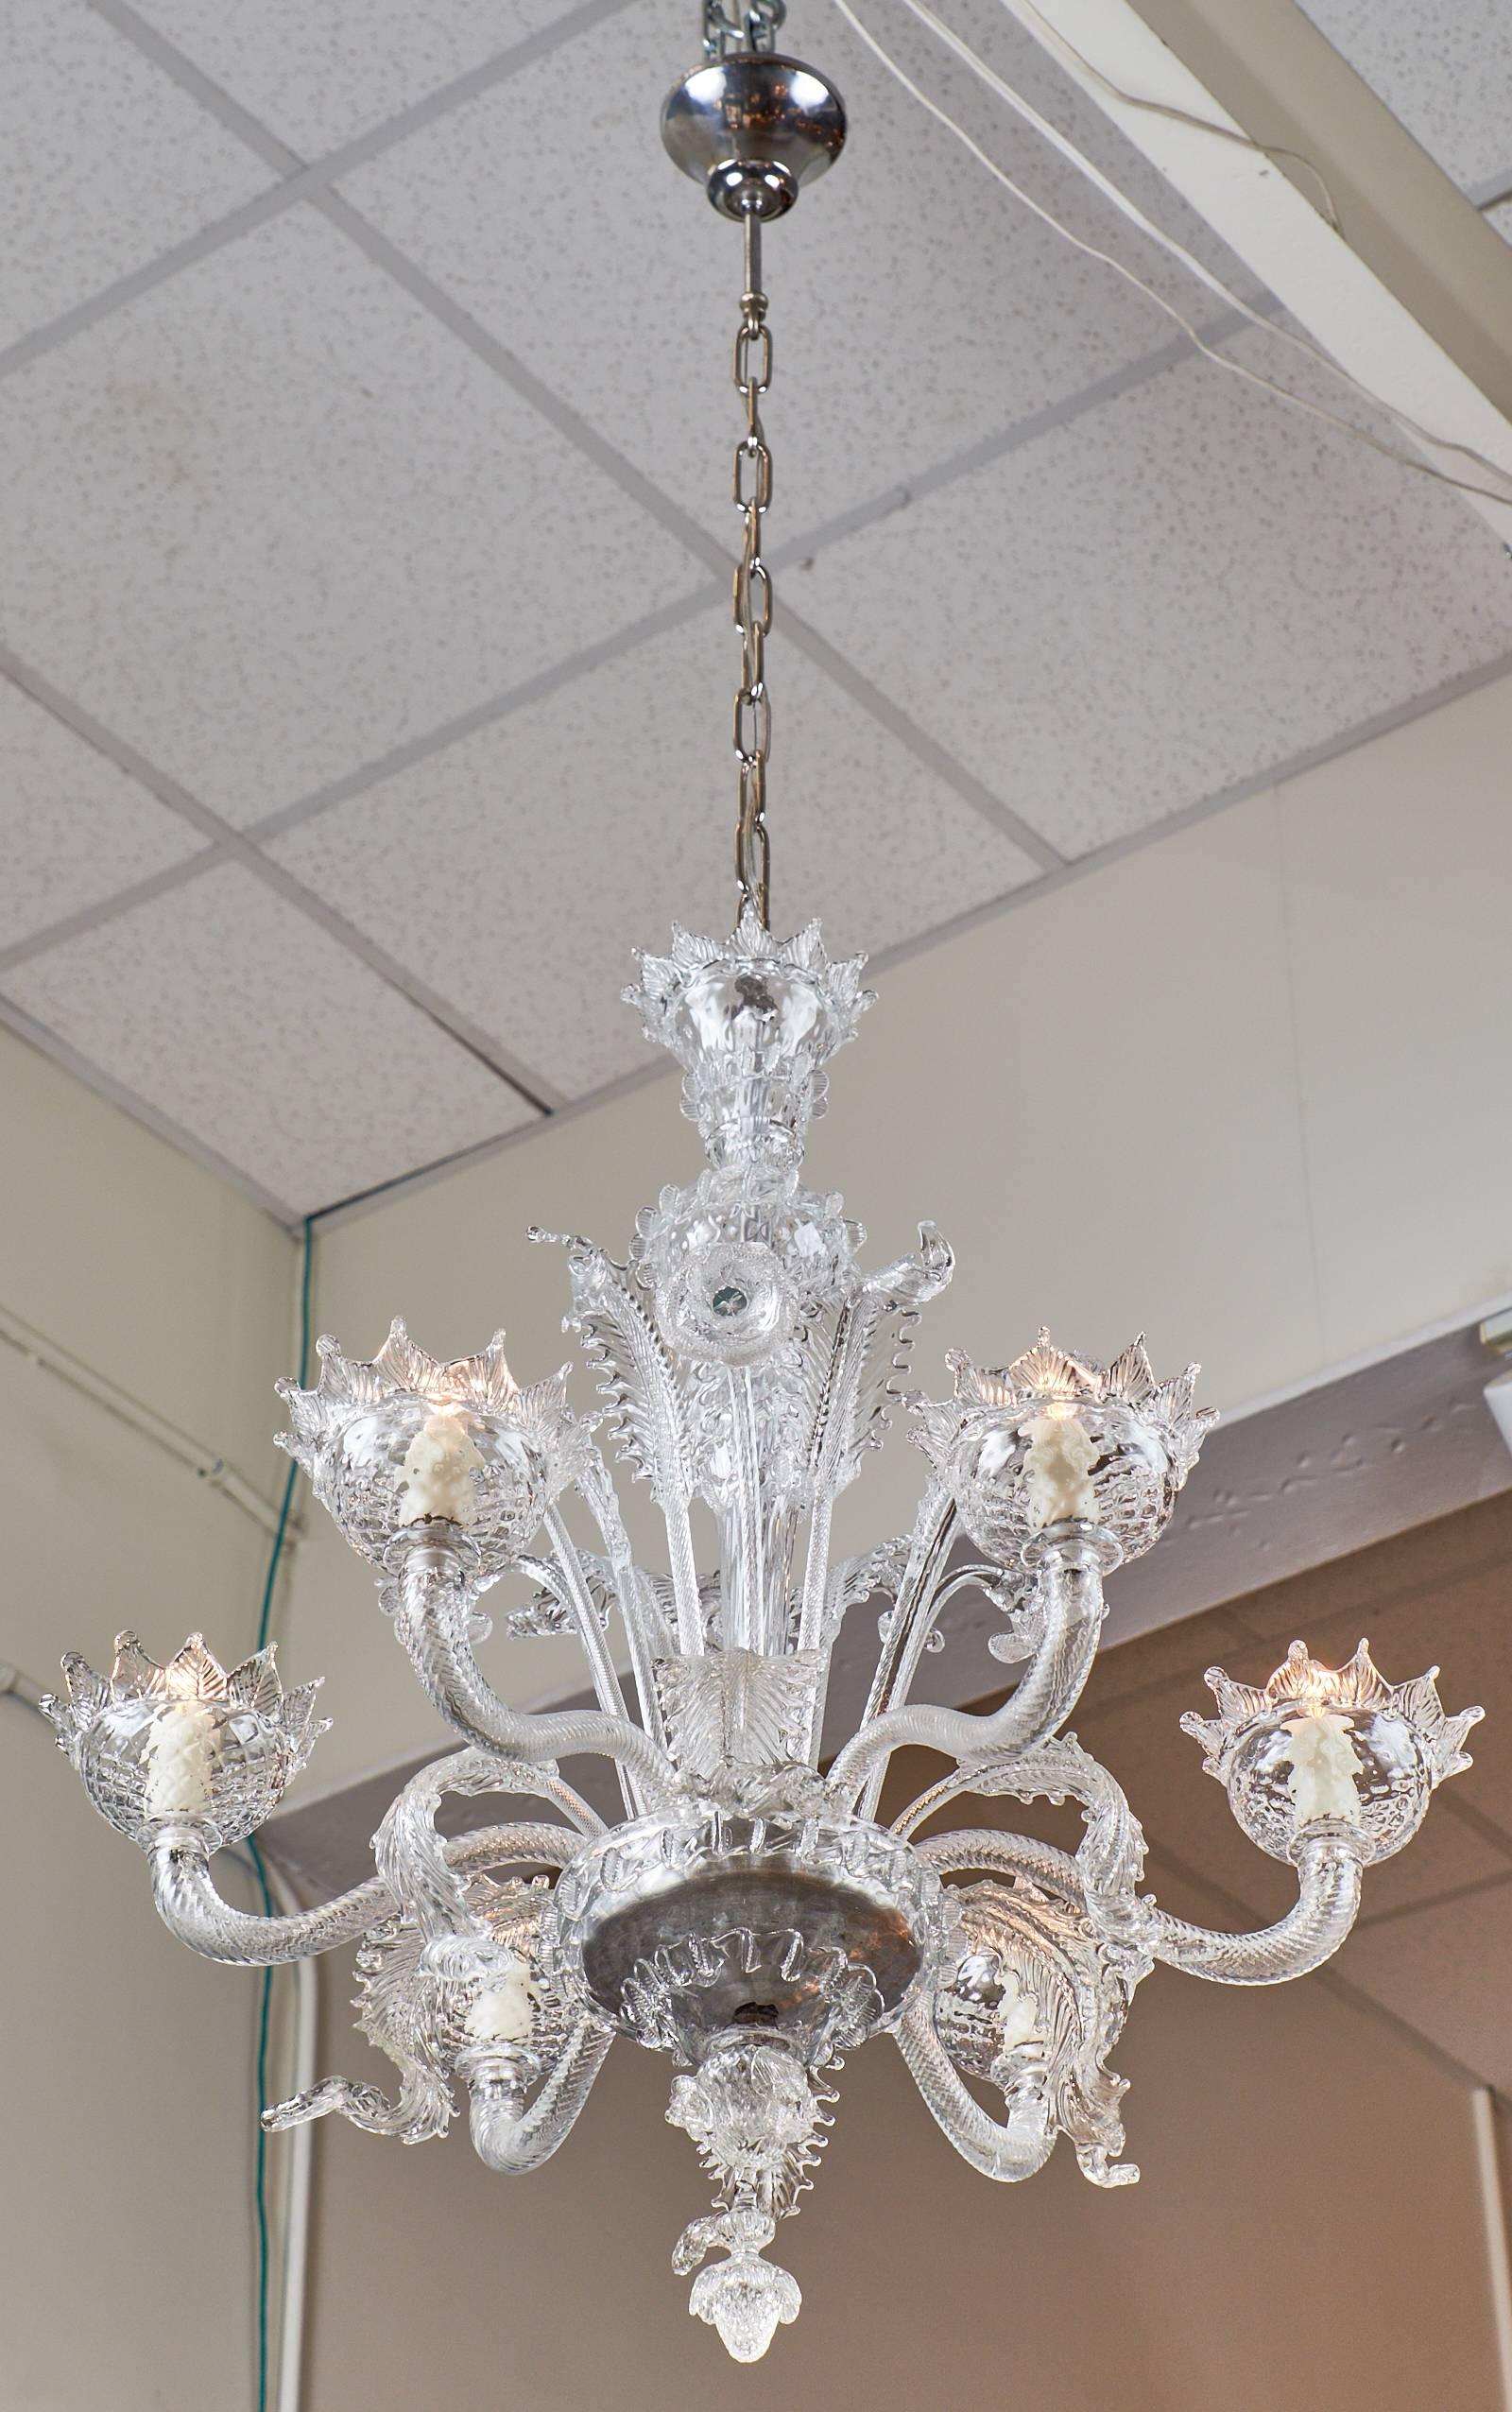 Stunning crystal clear handblown glass from the island of Murano at the beginning of the 20th century makes this wonderful Italian vintage chandelier so exquisite! This piece has intricate work on the leaves and main stem, as well as six torsado